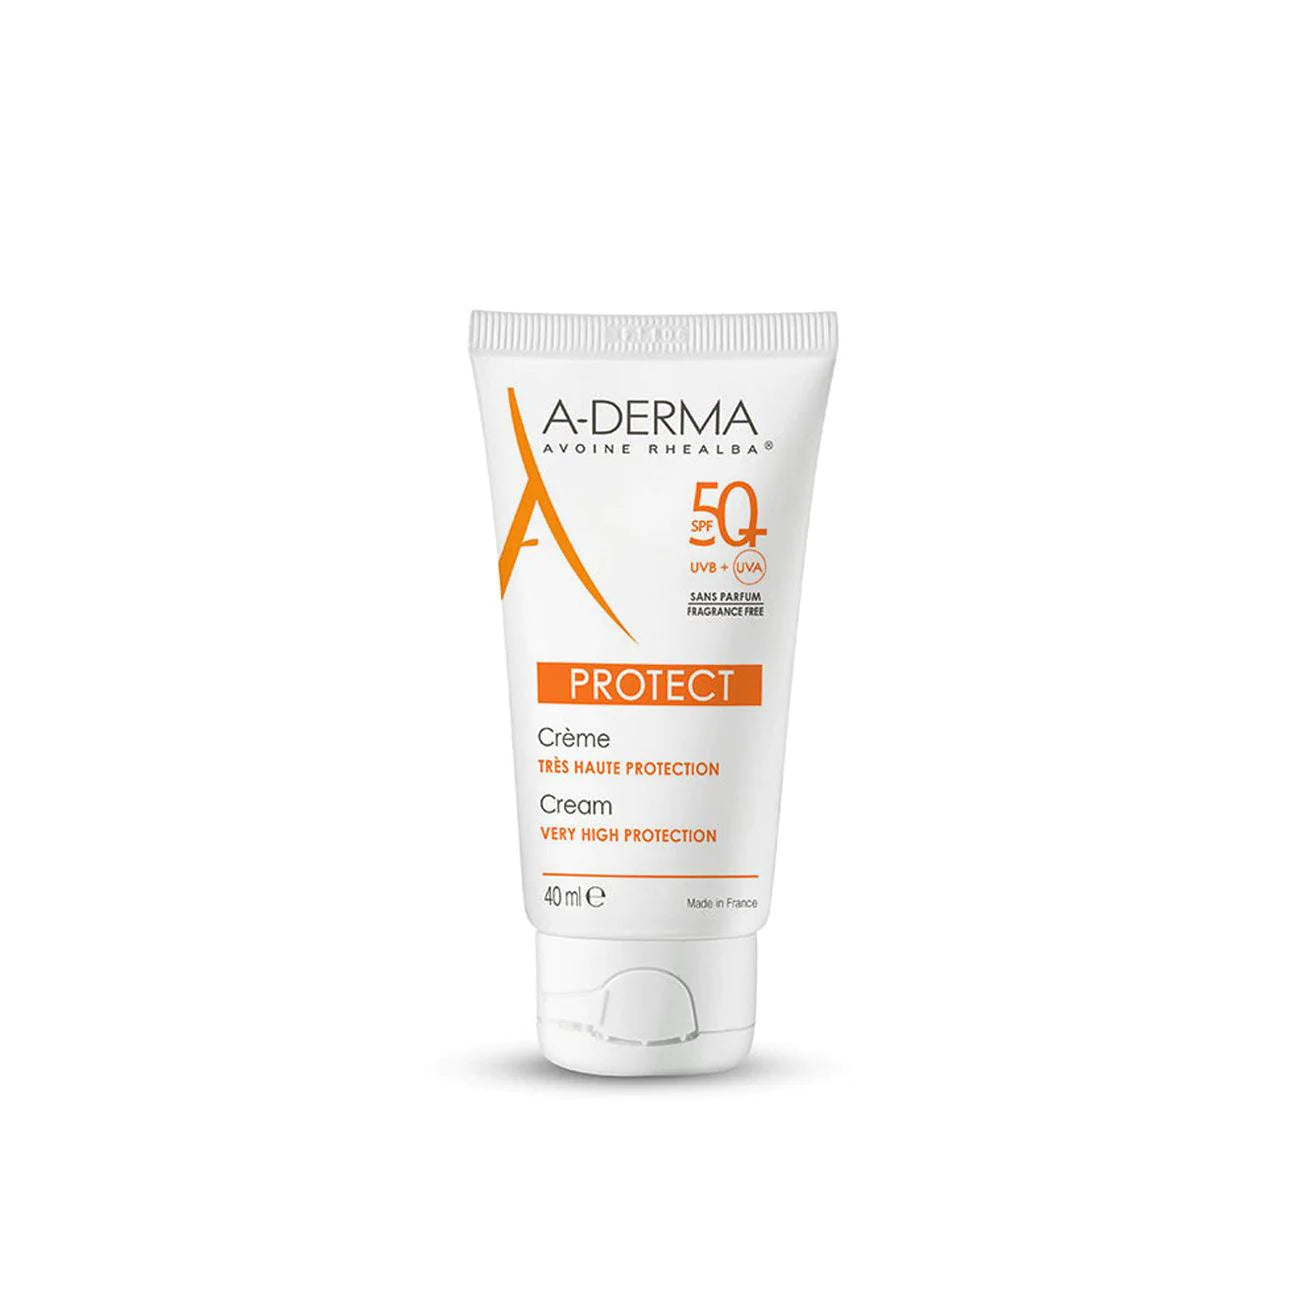 ADERMA Protect Sunscreen SPF50+ - Fragrance Free